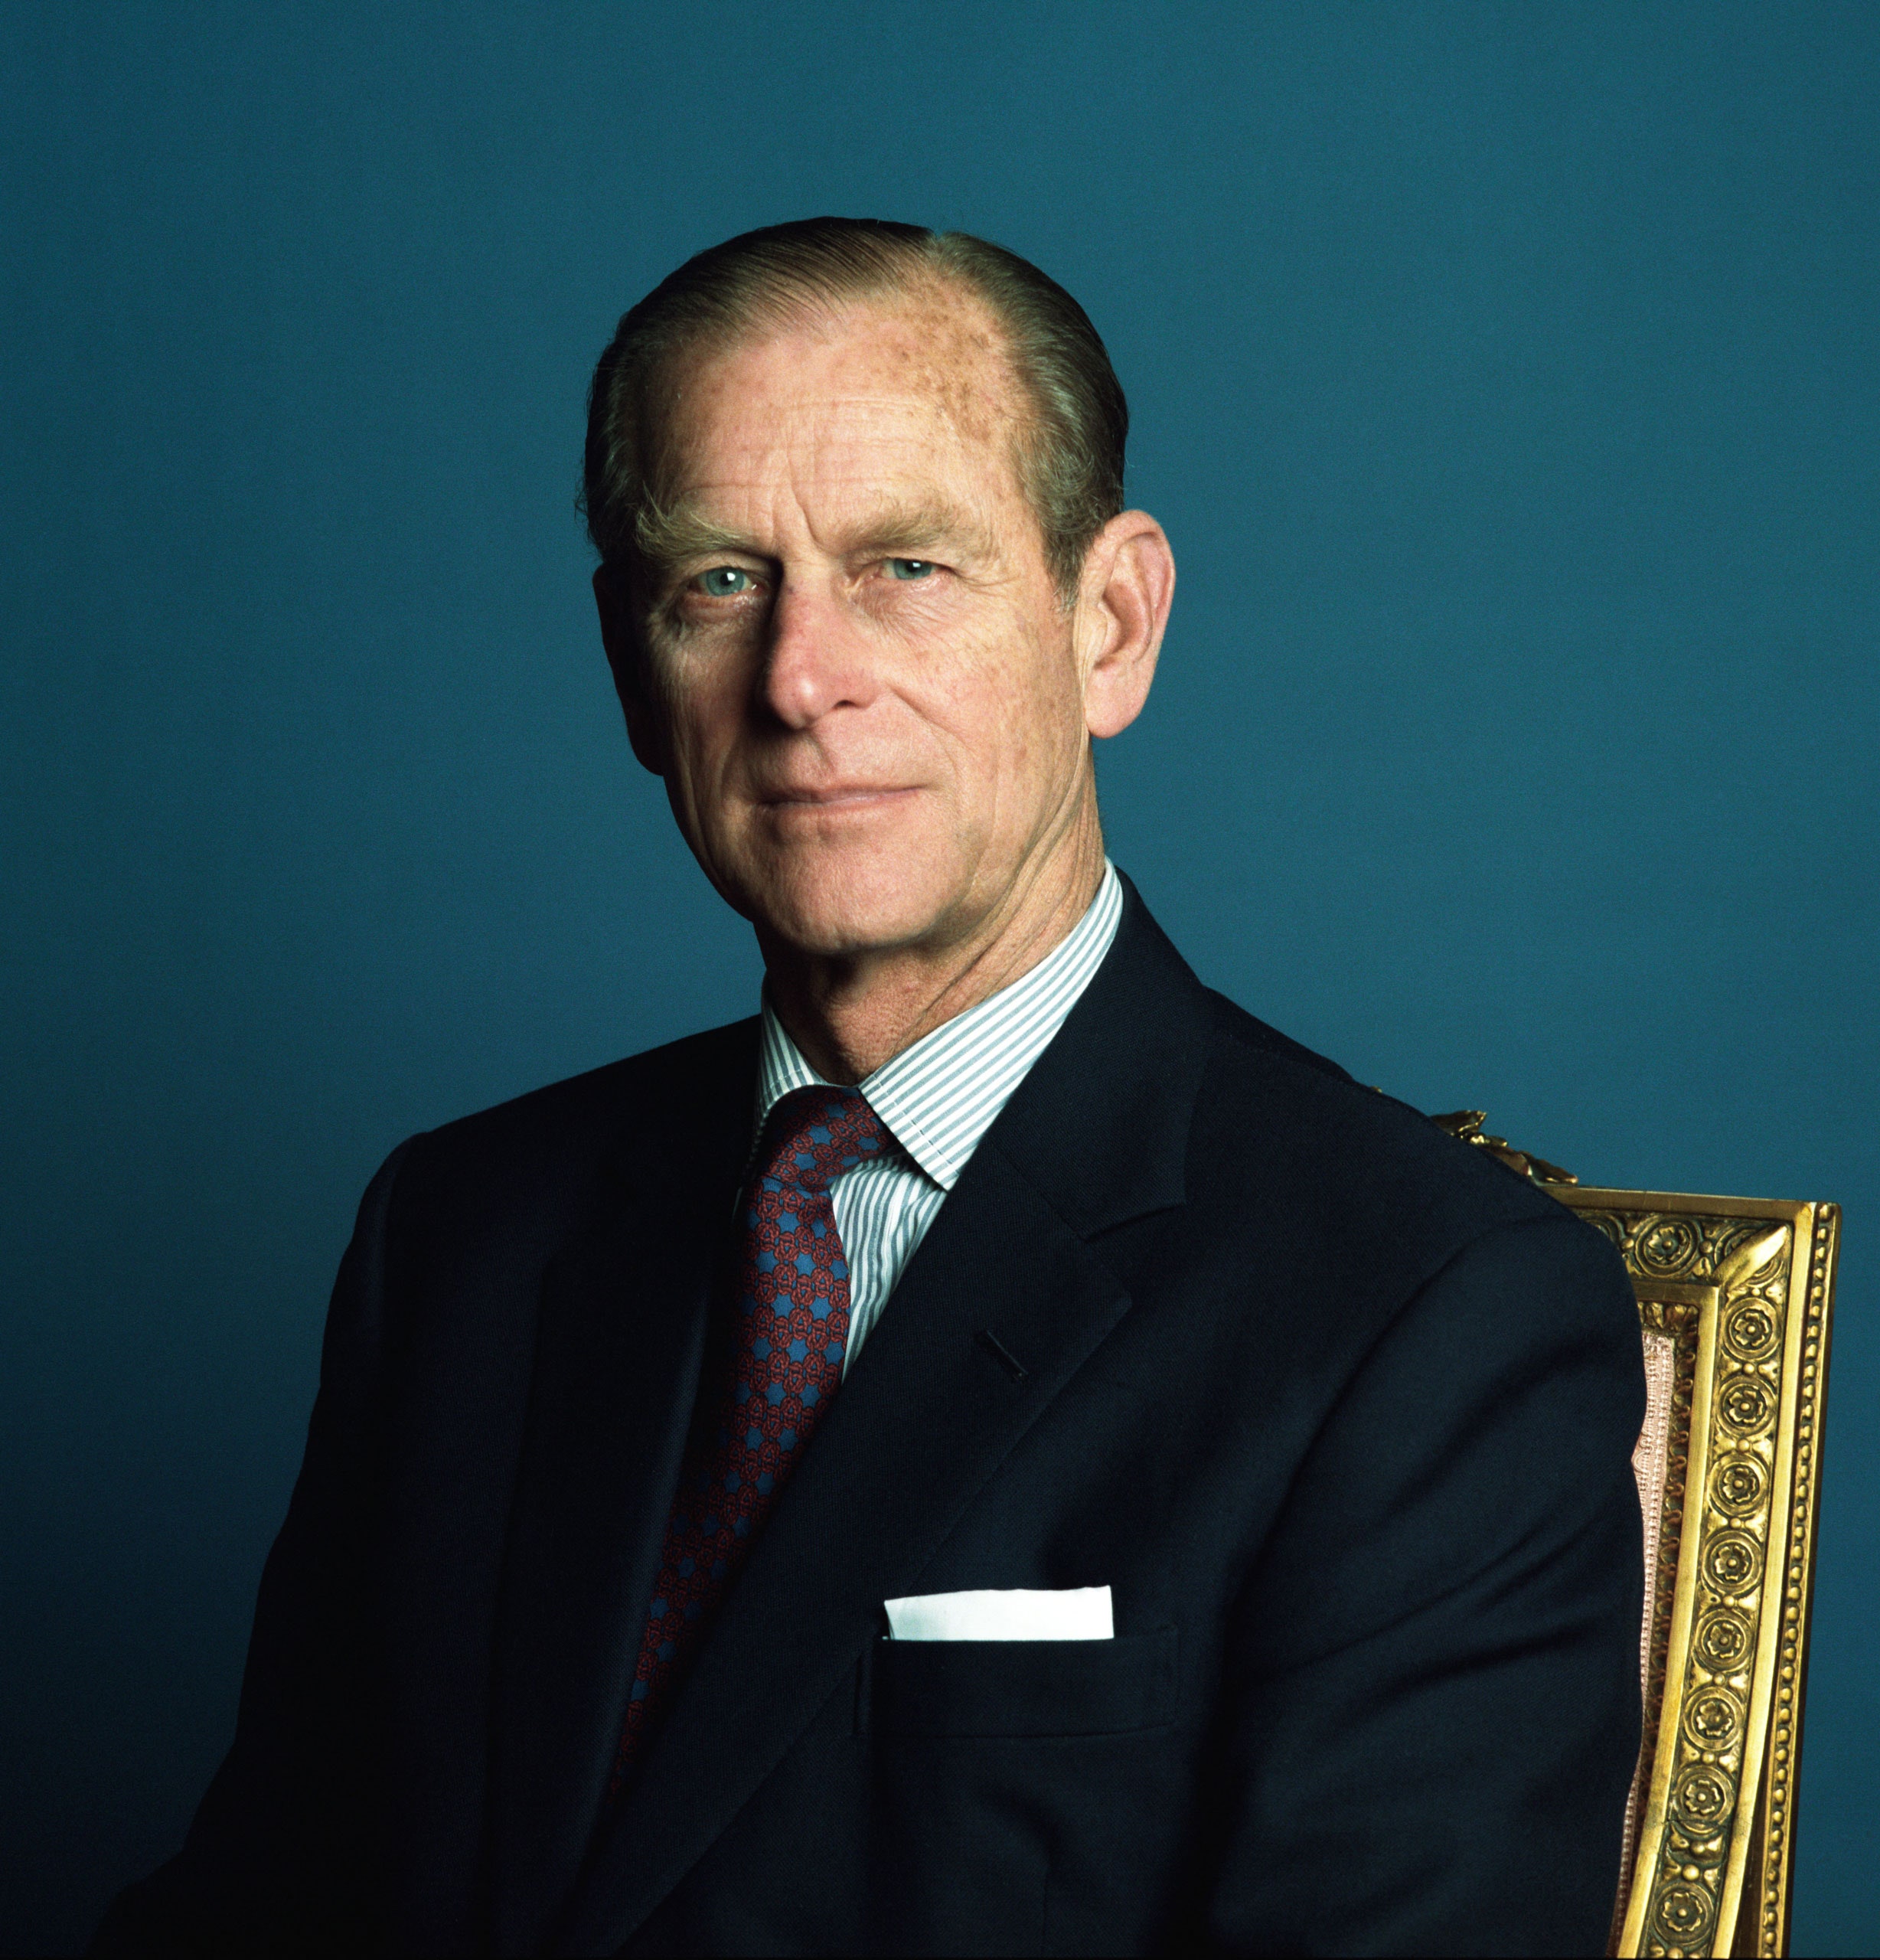 Why Won't "Prince Philip's Will" be not Disclosed For A Long Time